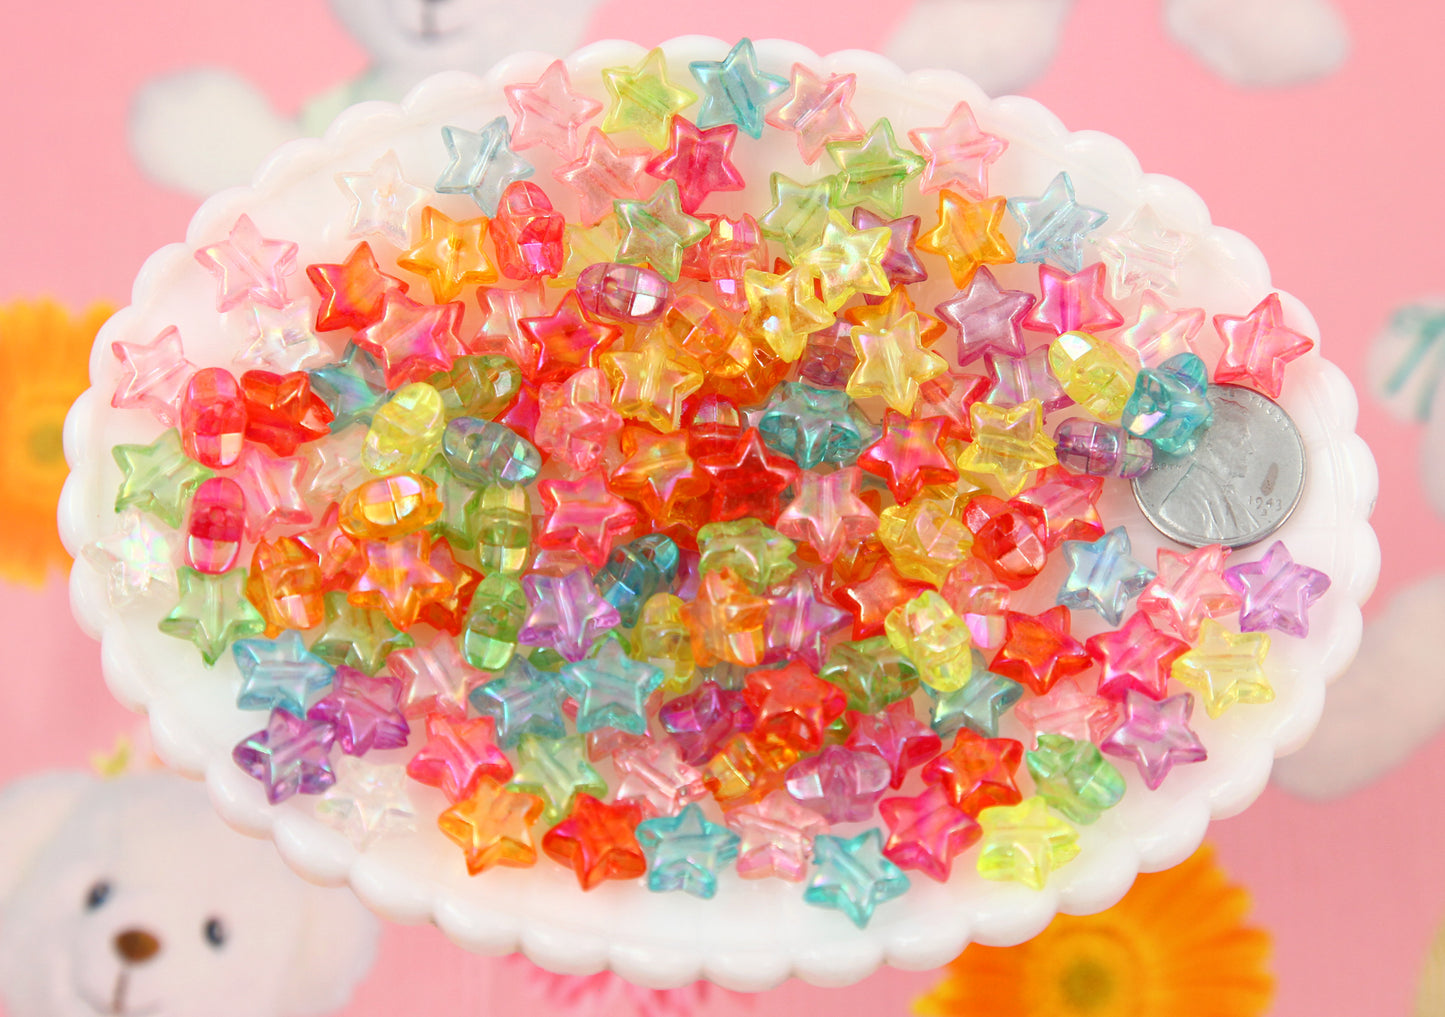 Star Beads - 12mm Small AB Stars Iridescent Pastel Resin or Acrylic Beads, mixed color, small size beads - 150 pcs set